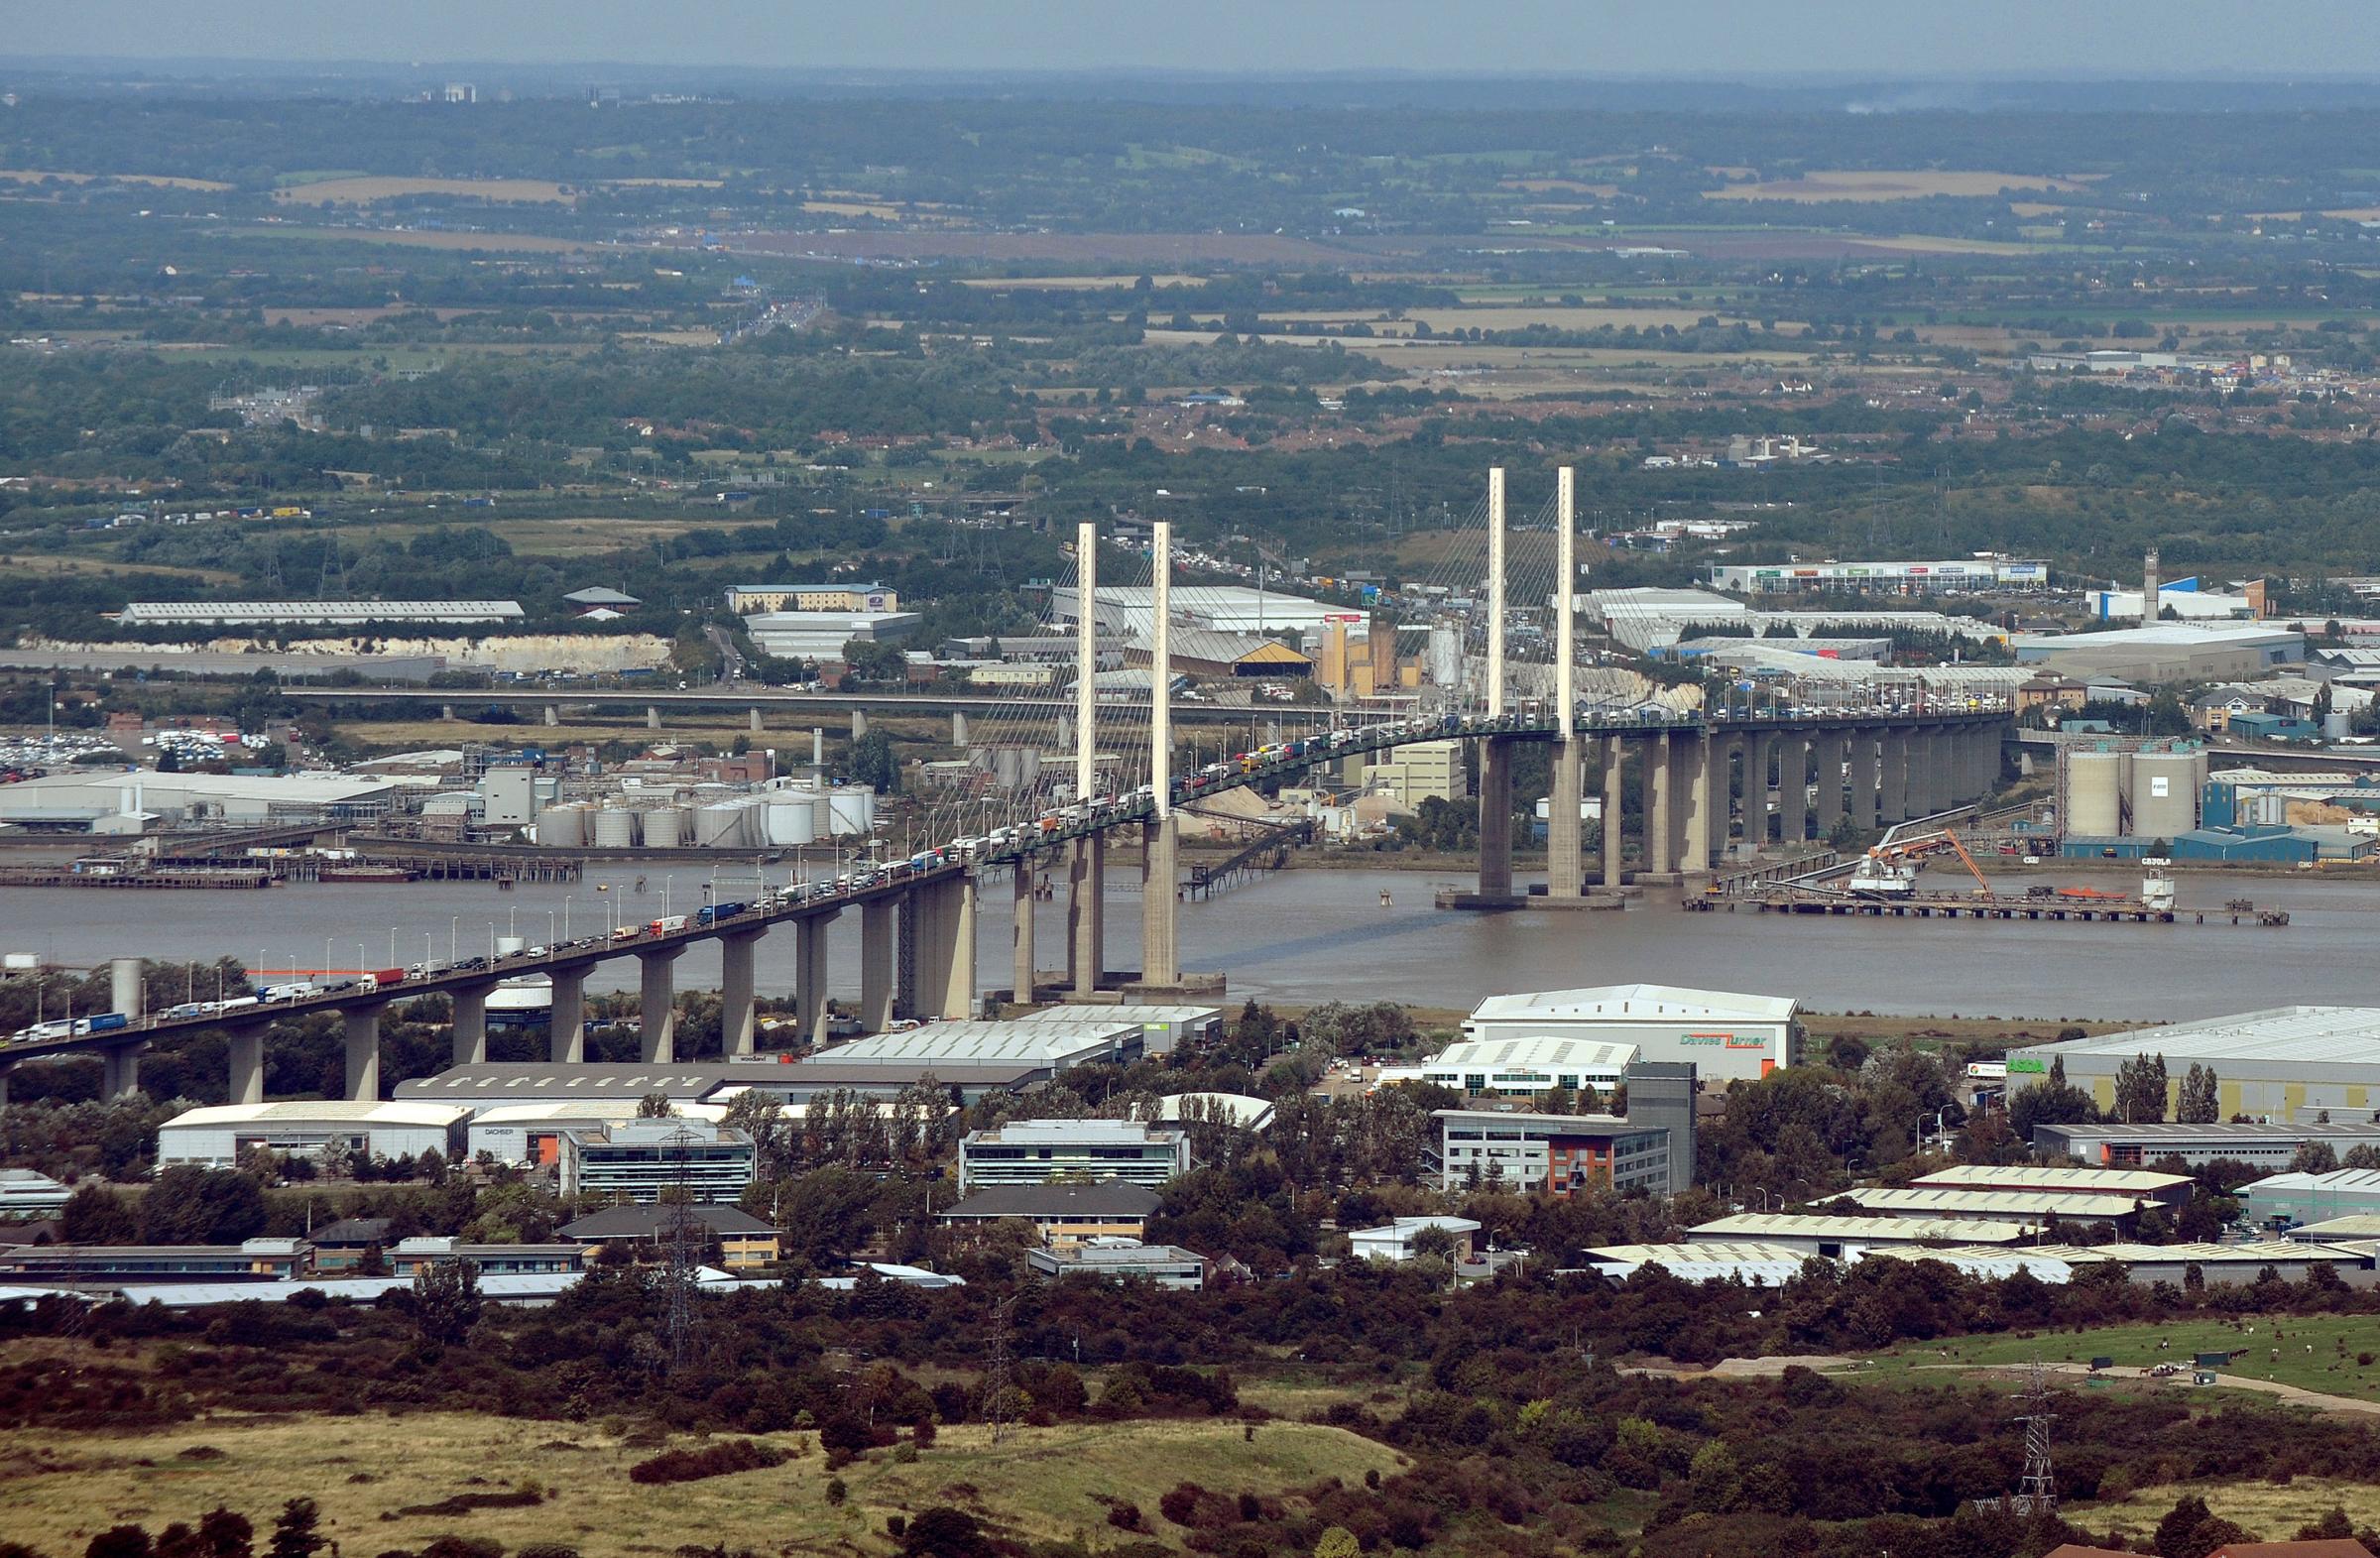 Birds eye view - an aerial view of the QEII bridge, which connects Essex with Kent, in 2014